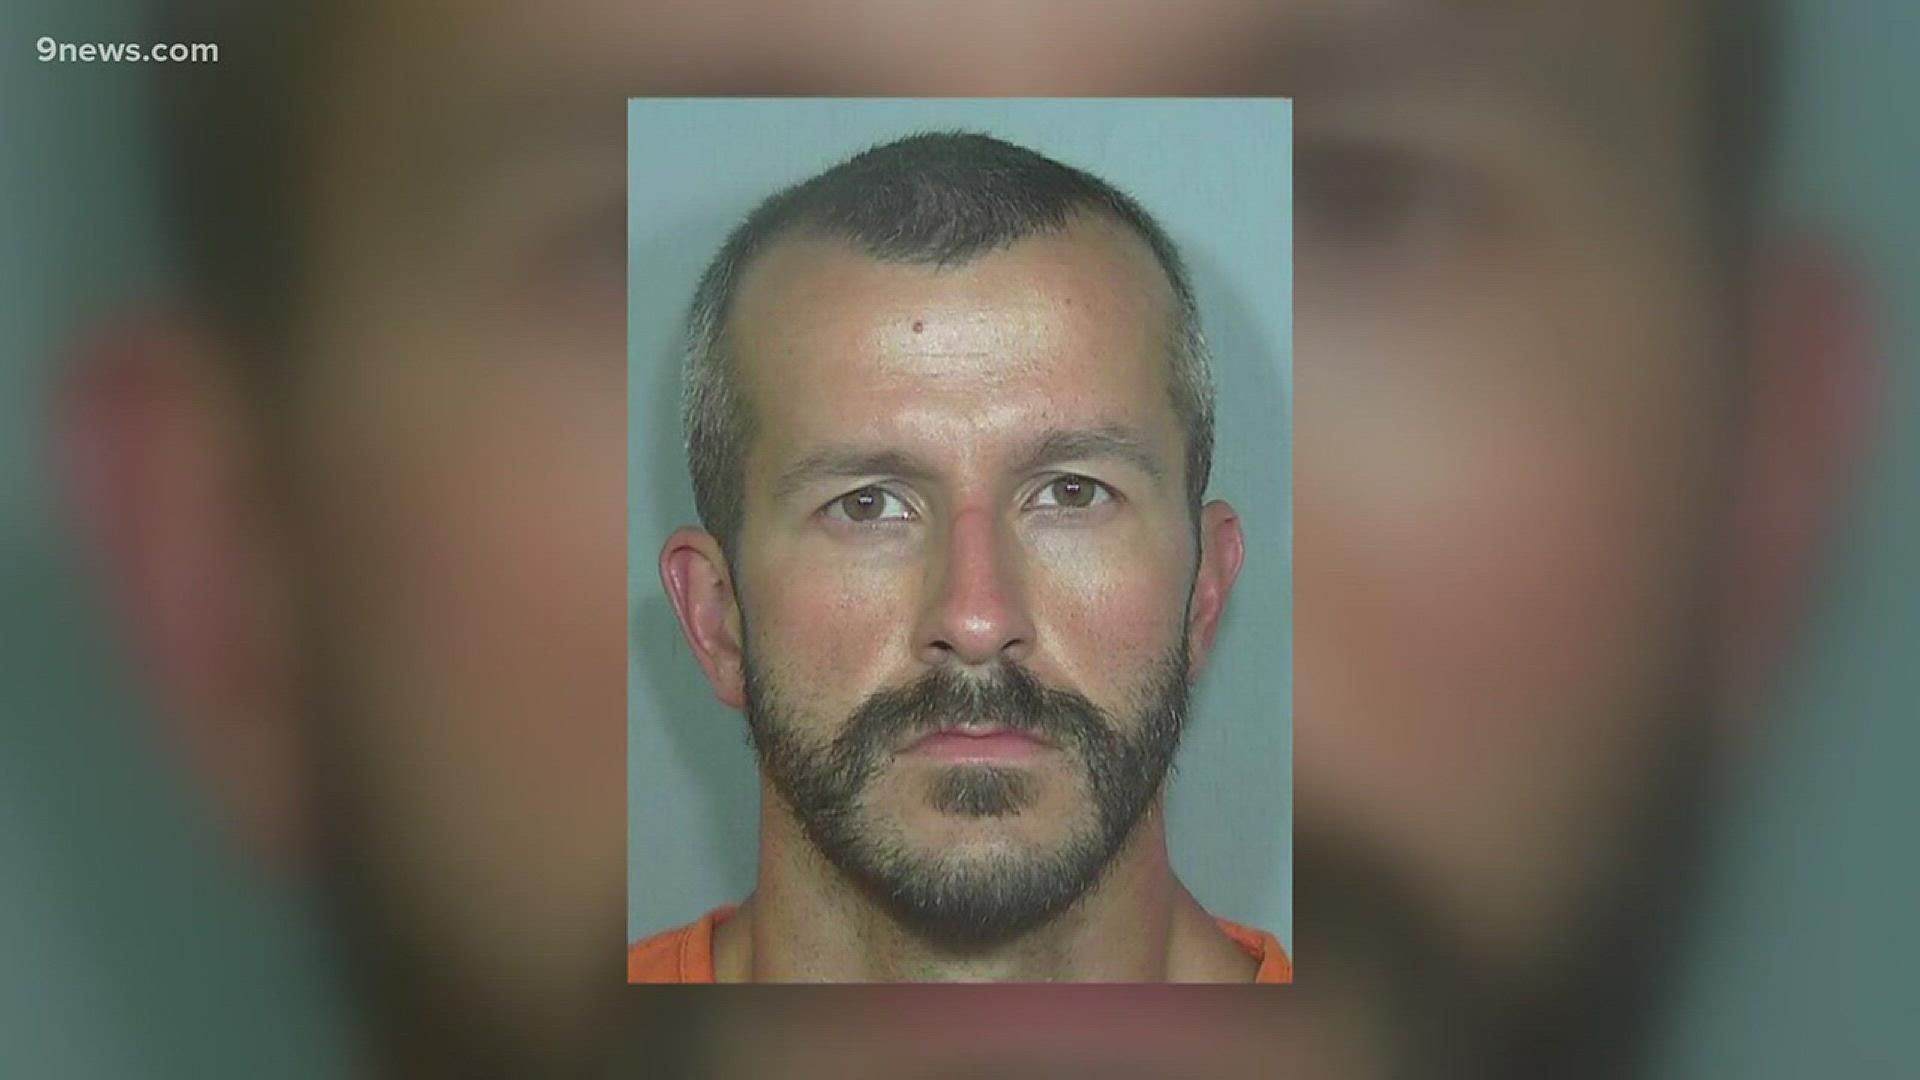 A week ago - Chris Watts pleaded for his missing family to return home. Now, he admits to killing his wife, according to court documents, but insists he did not kill their children